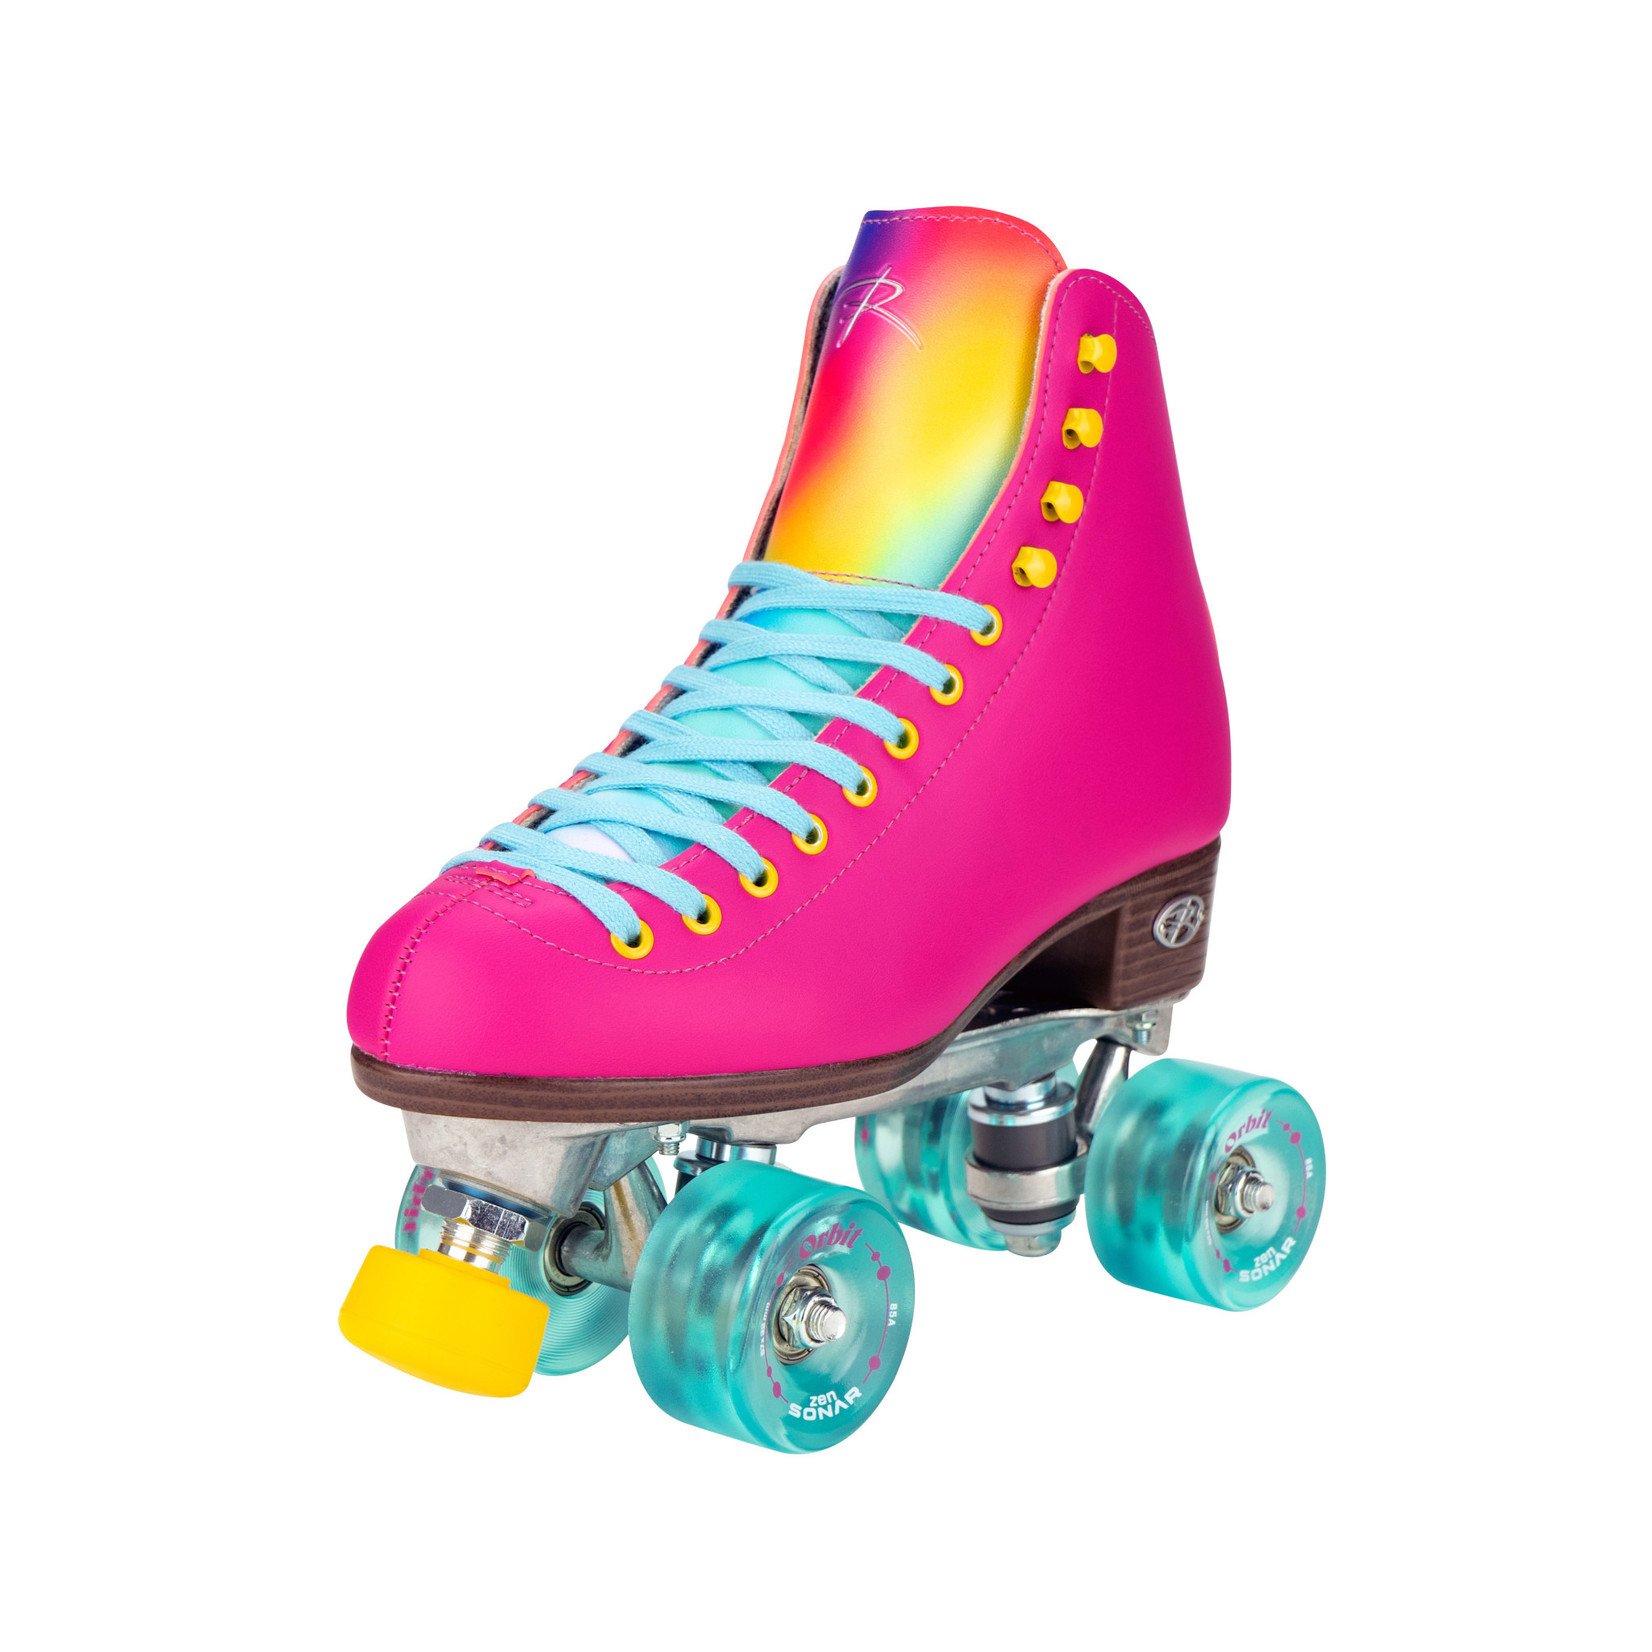 Riedell Riedell Orbit skate - Orchid